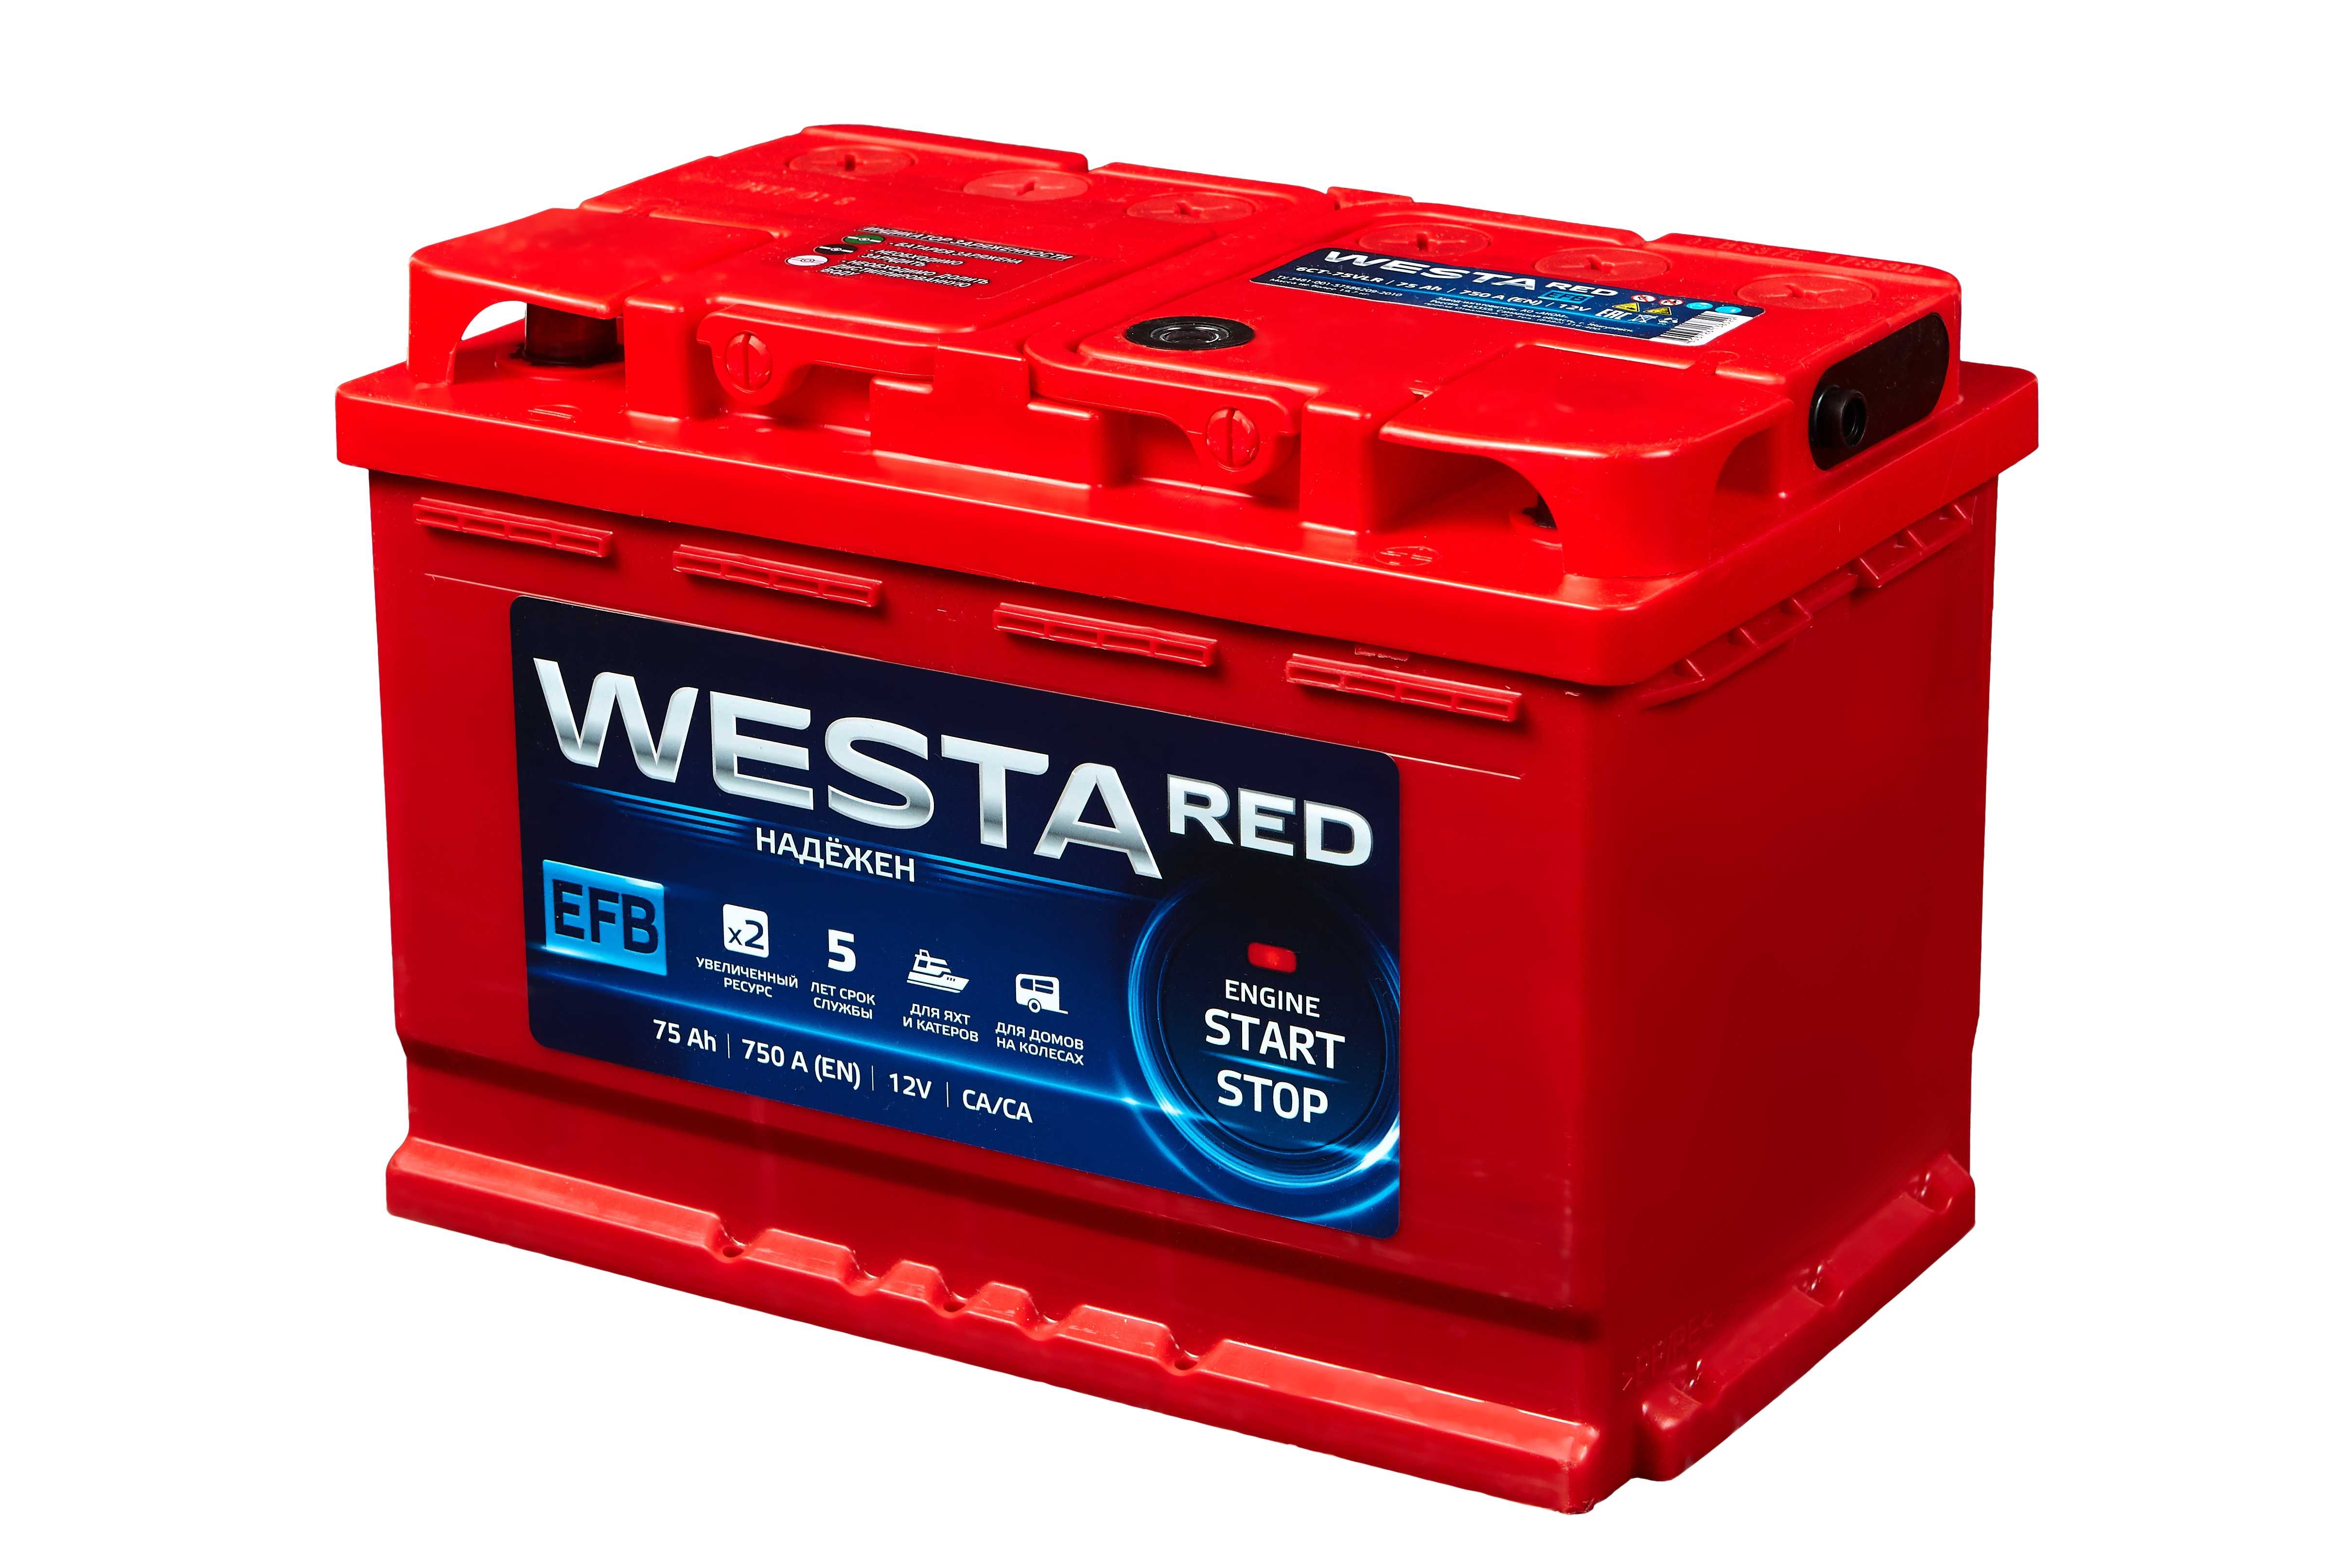 Westa Red 60 a, 640 a, 6 CT -60. Westa Red аккумулятор разбор. ТОО "Кайнар-АКБ" Vesta Red 77ah.